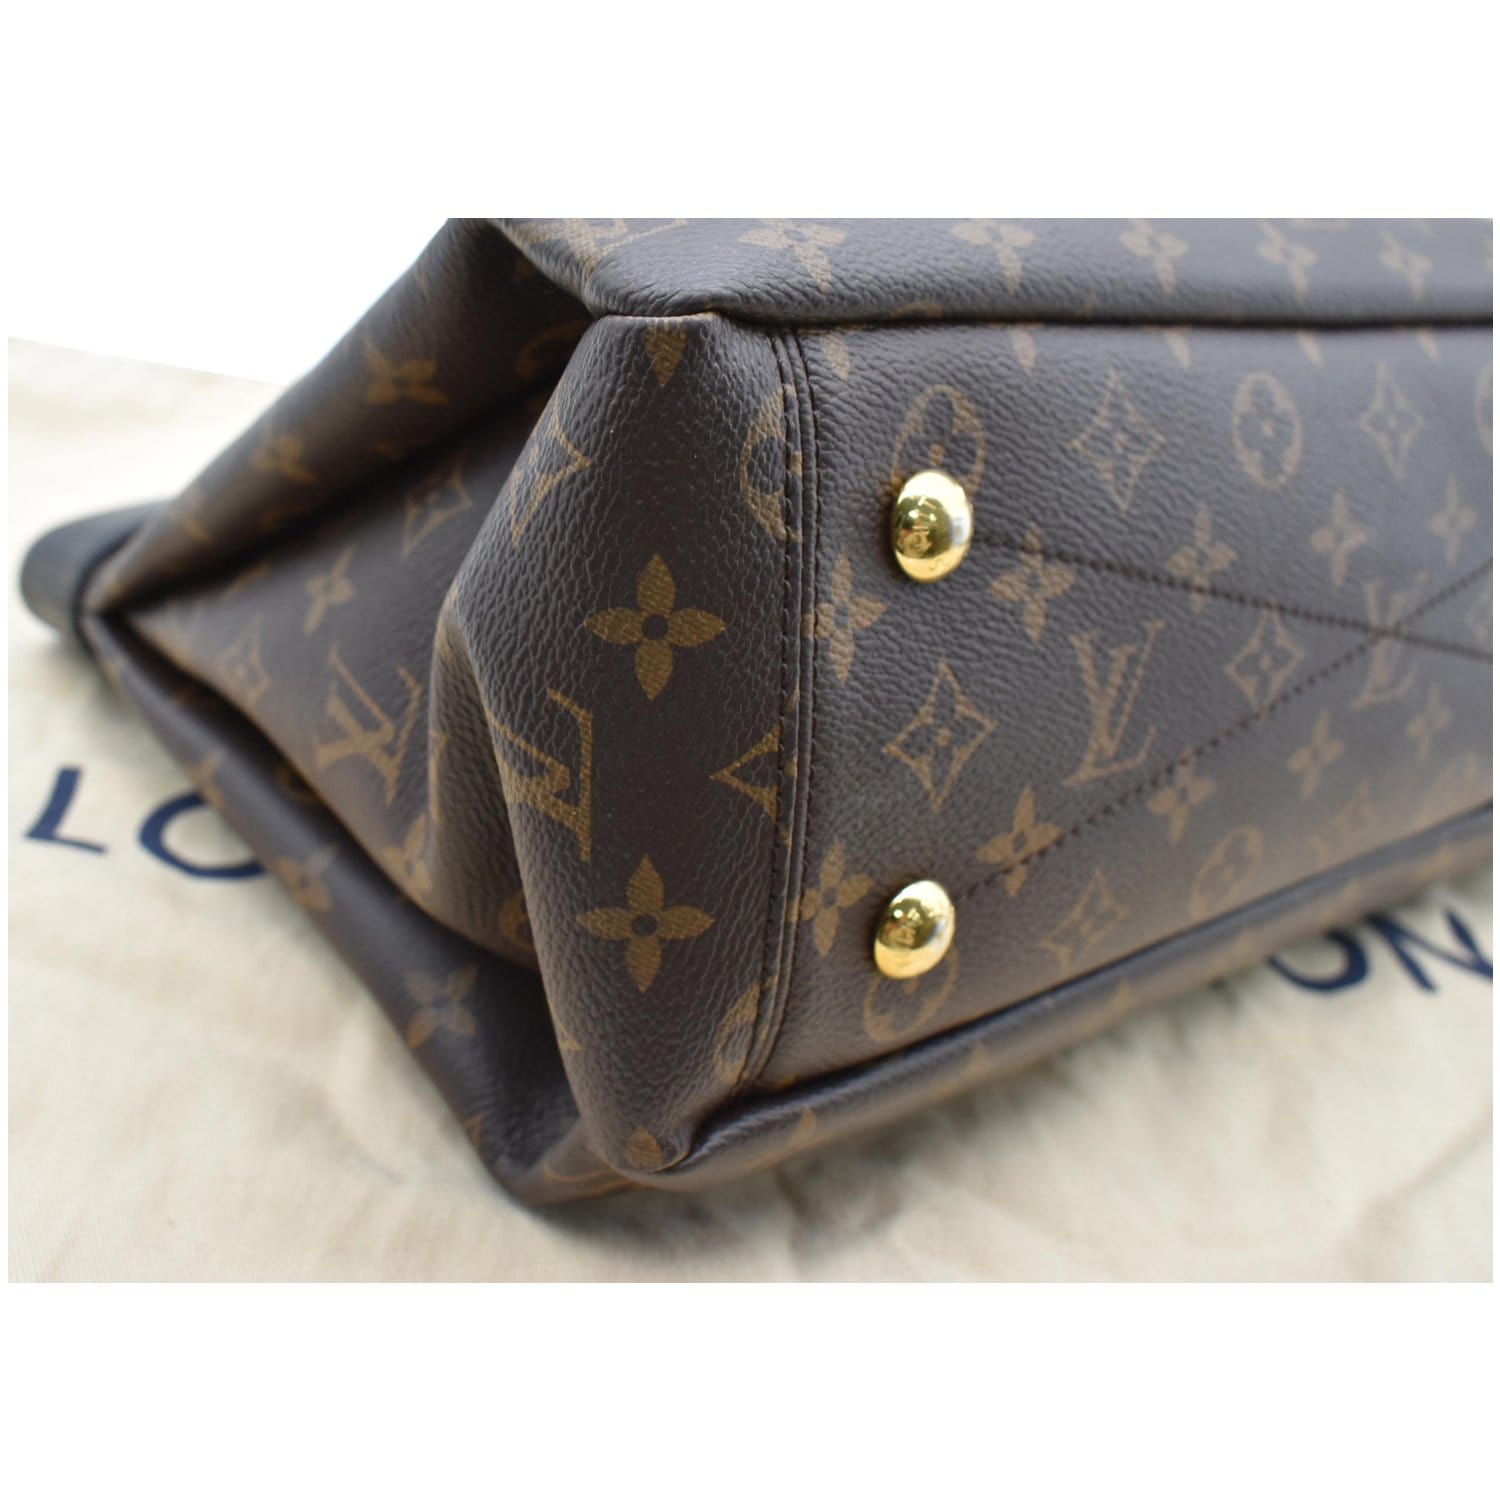 Louis Vuitton Aurore Leather and Ebene Monogram Coated Canvas Pallas Chain Bag Gold Hardware, 2014 (Very Good)